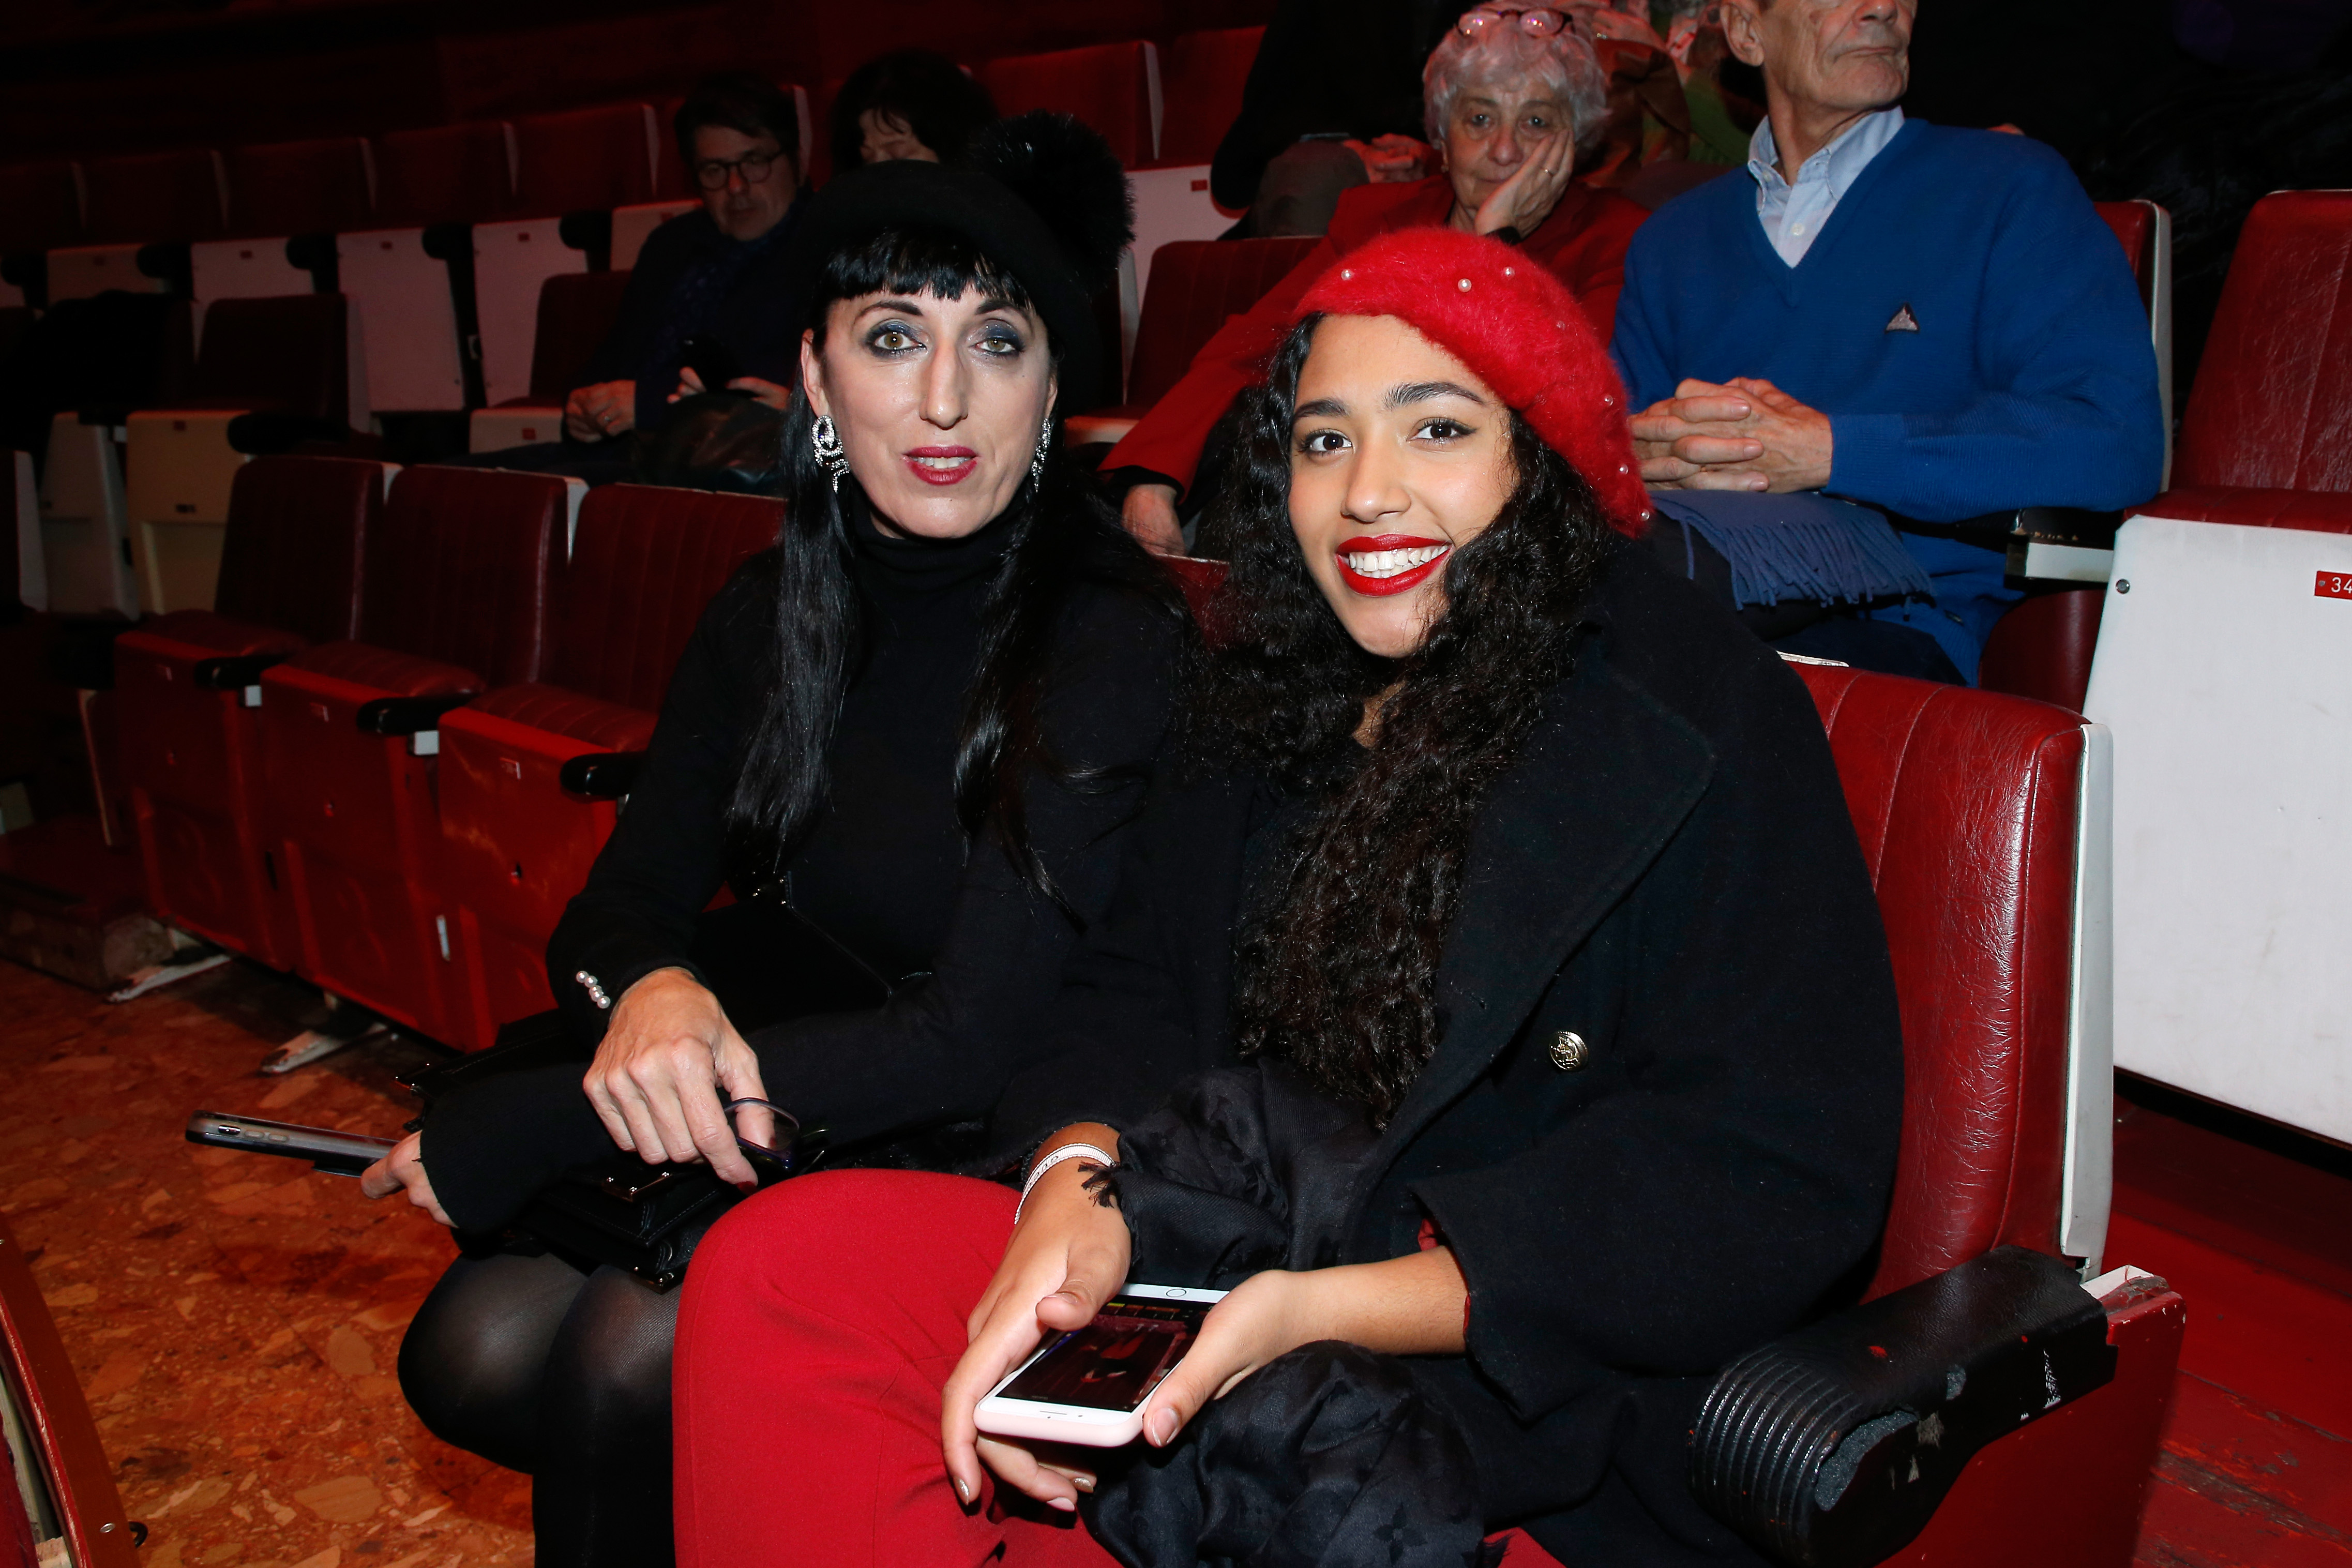 Rossy de Palma and Luna Garcia at the "Depardieu Chante Barbara" at "Le Cirque D'Hiver" on November 14, 2017 in Paris, France. | Source: Getty Images